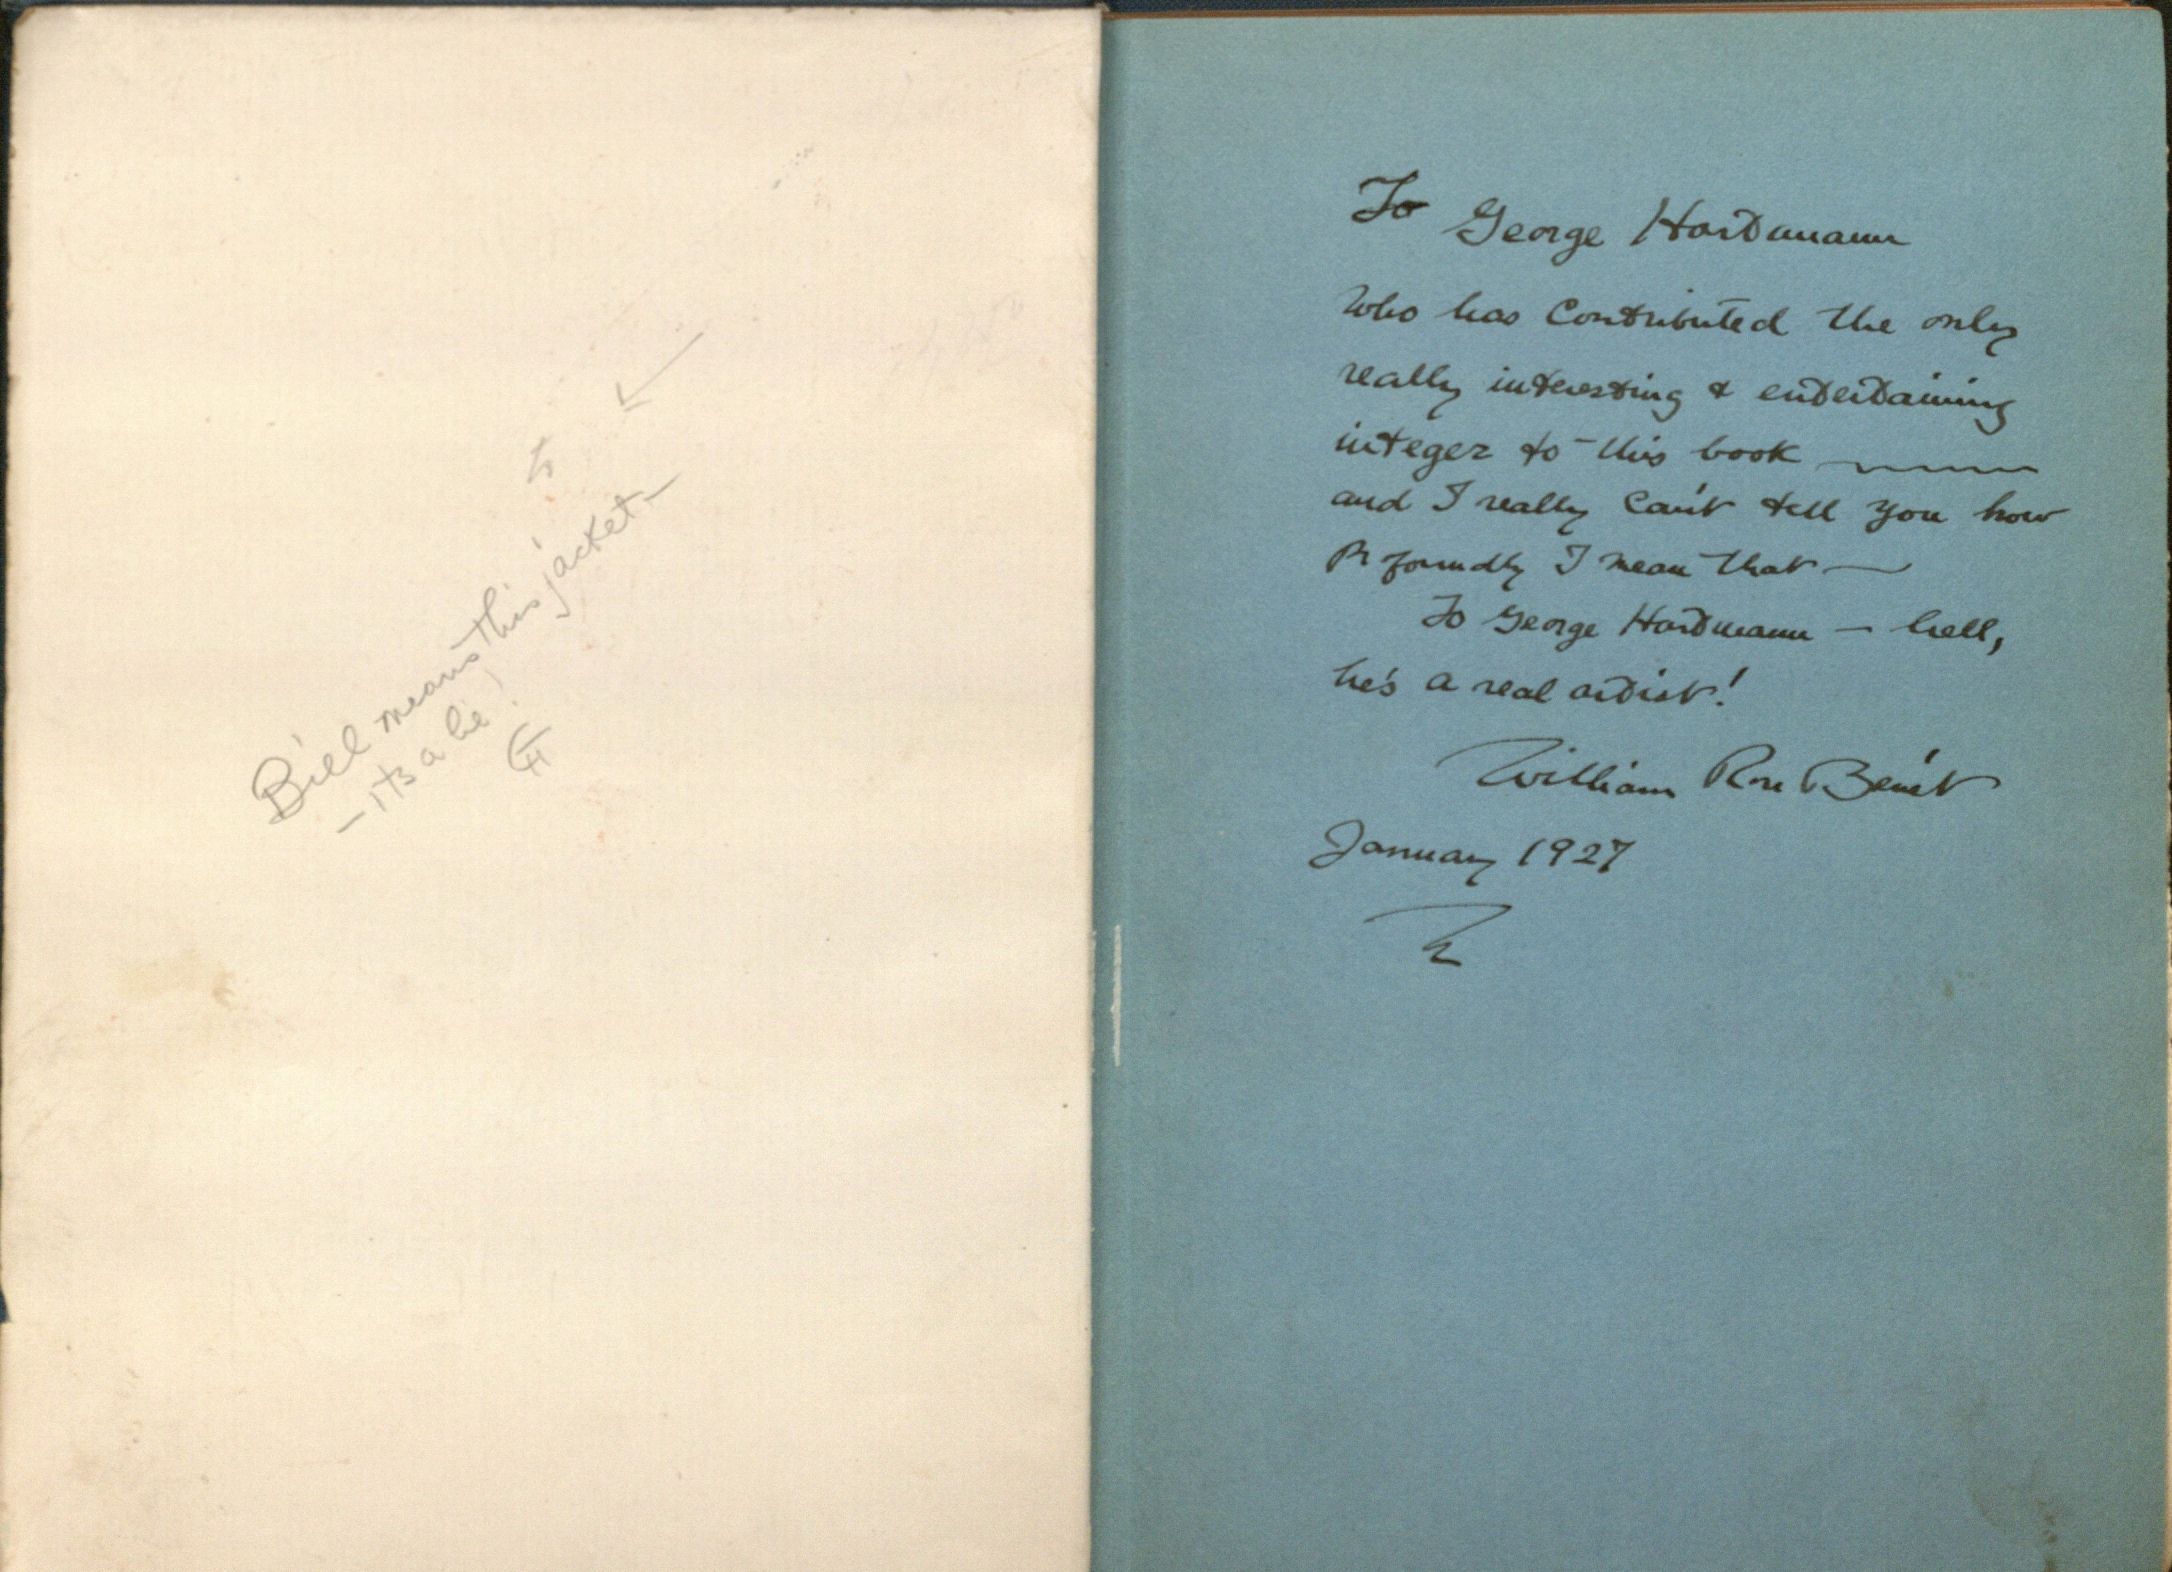 Inscriptions by Hartmann (left) and Benet (right)  in William Rose Benet's Wild Goslings (1927)